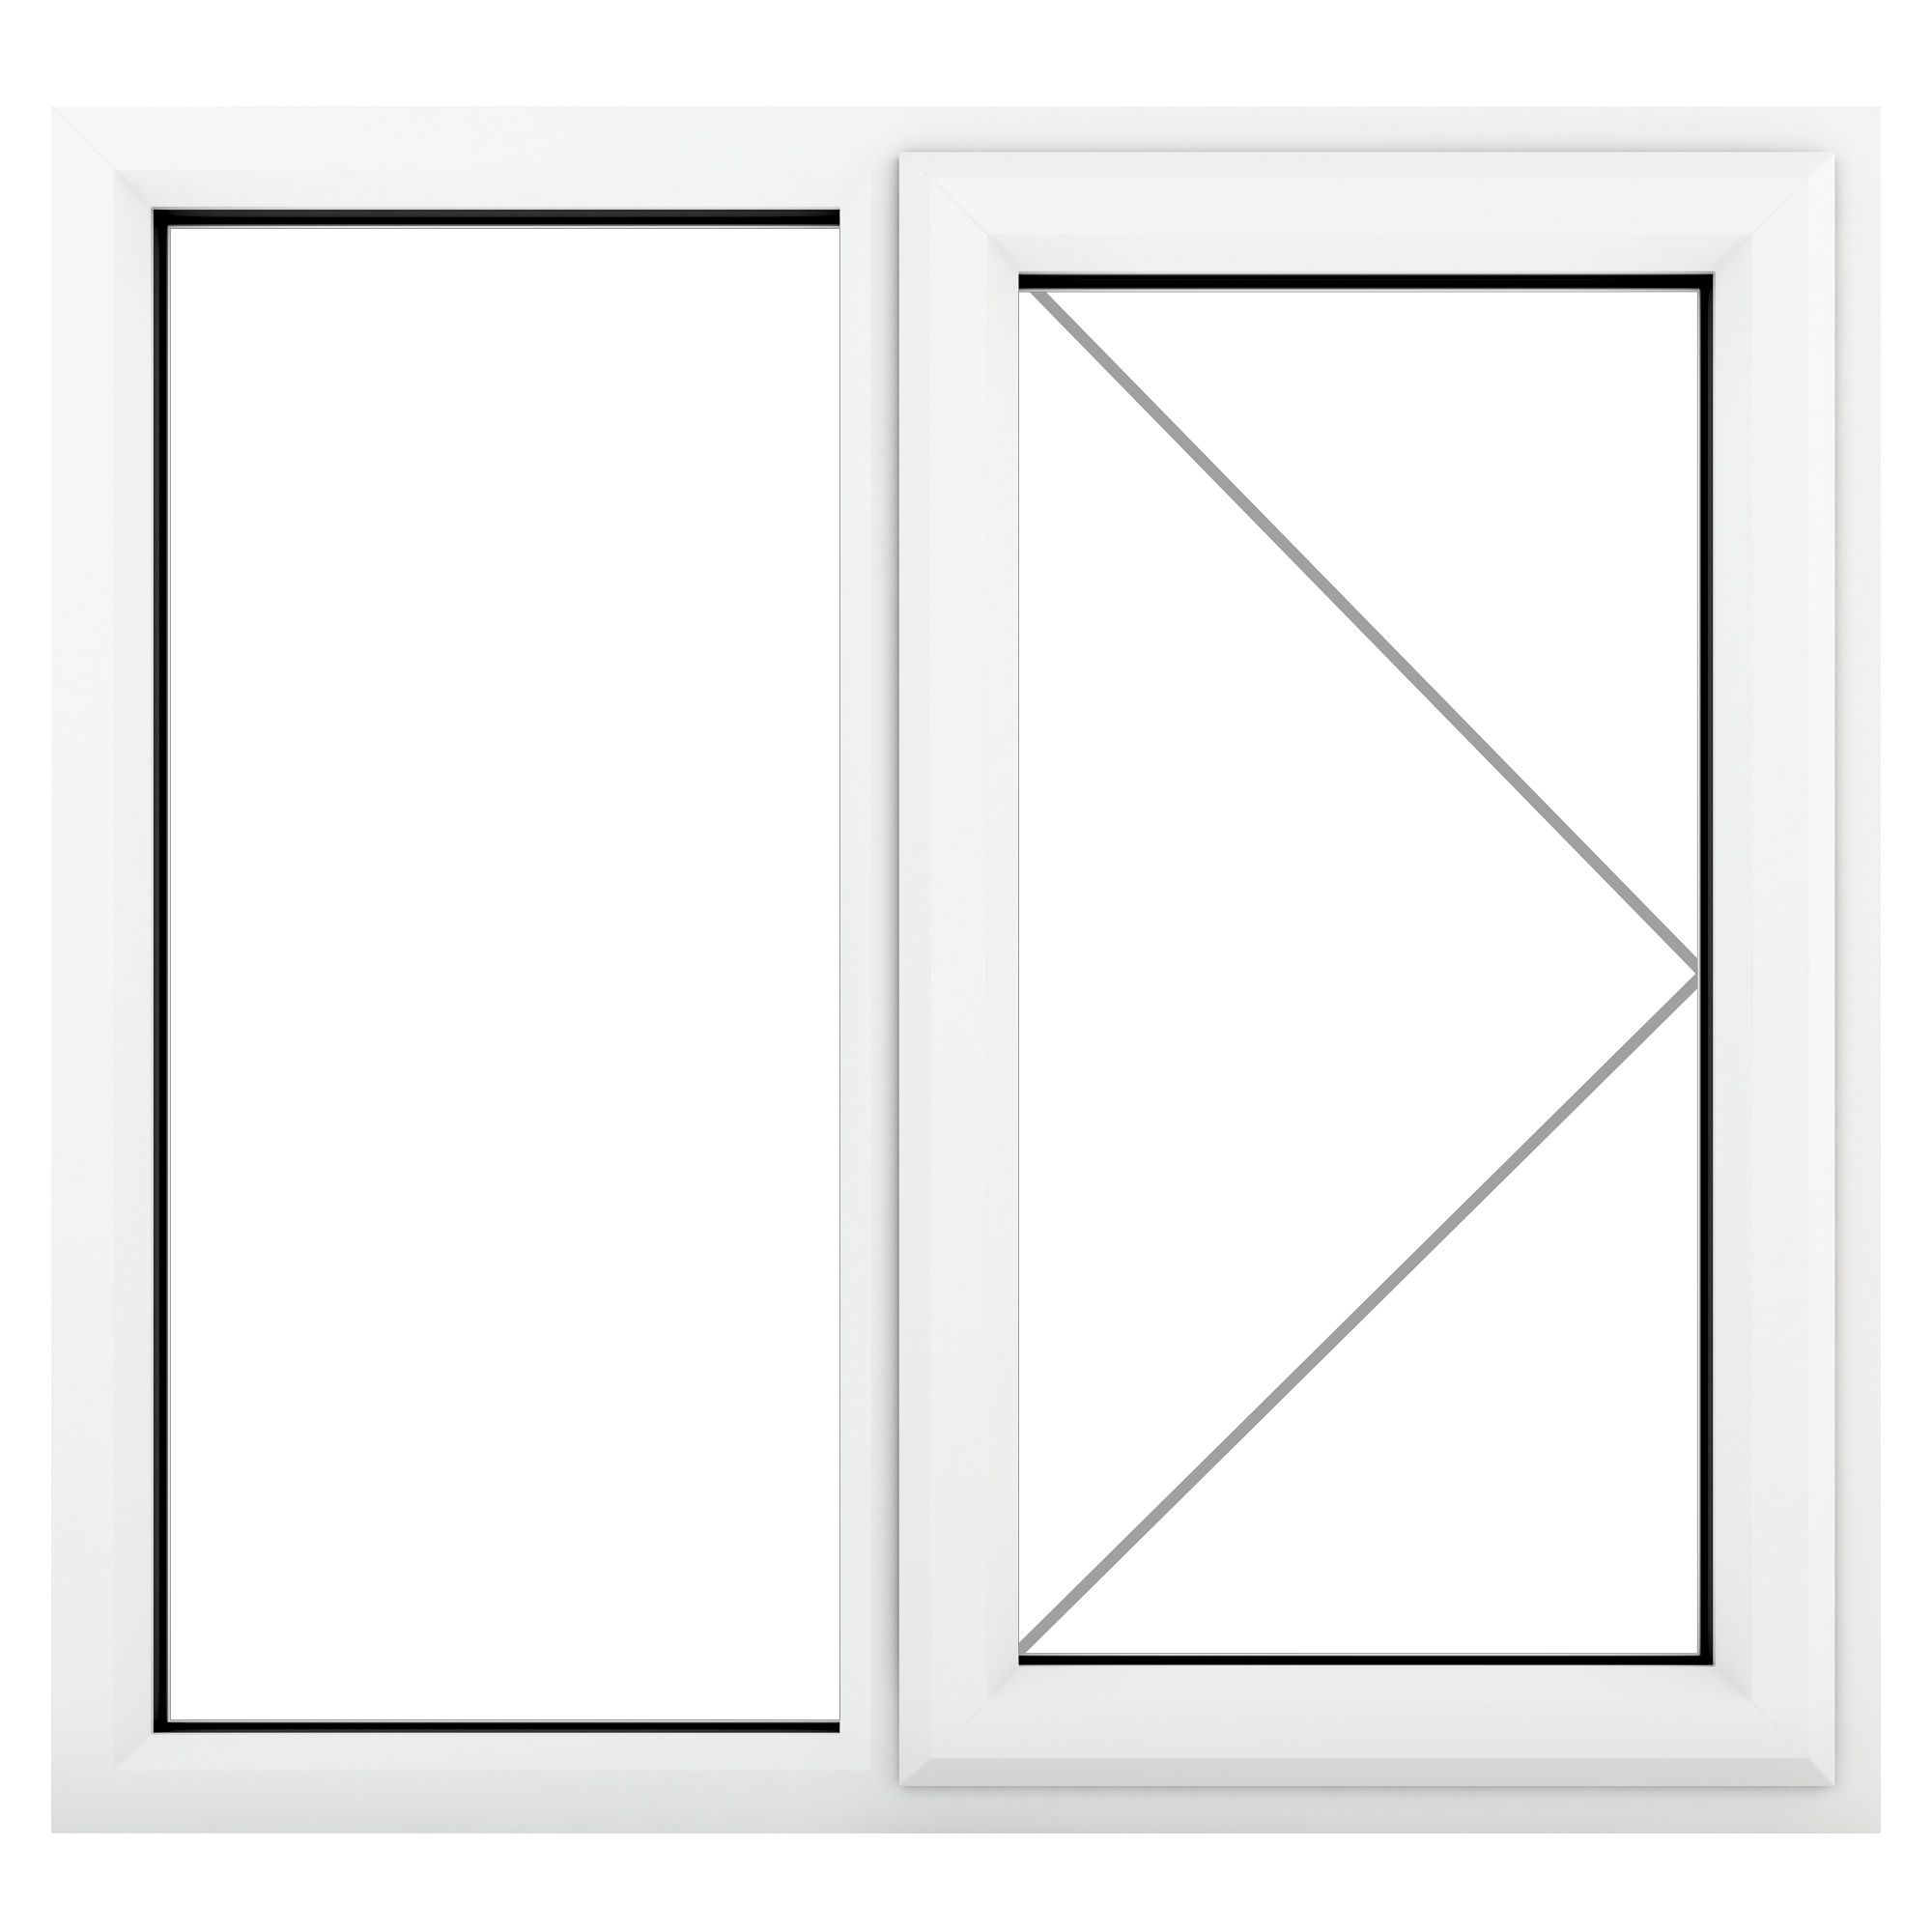 Fortia 2P Clear Glazed White uPVC Right-handed Swinging Window, (H)965mm (W)905mm